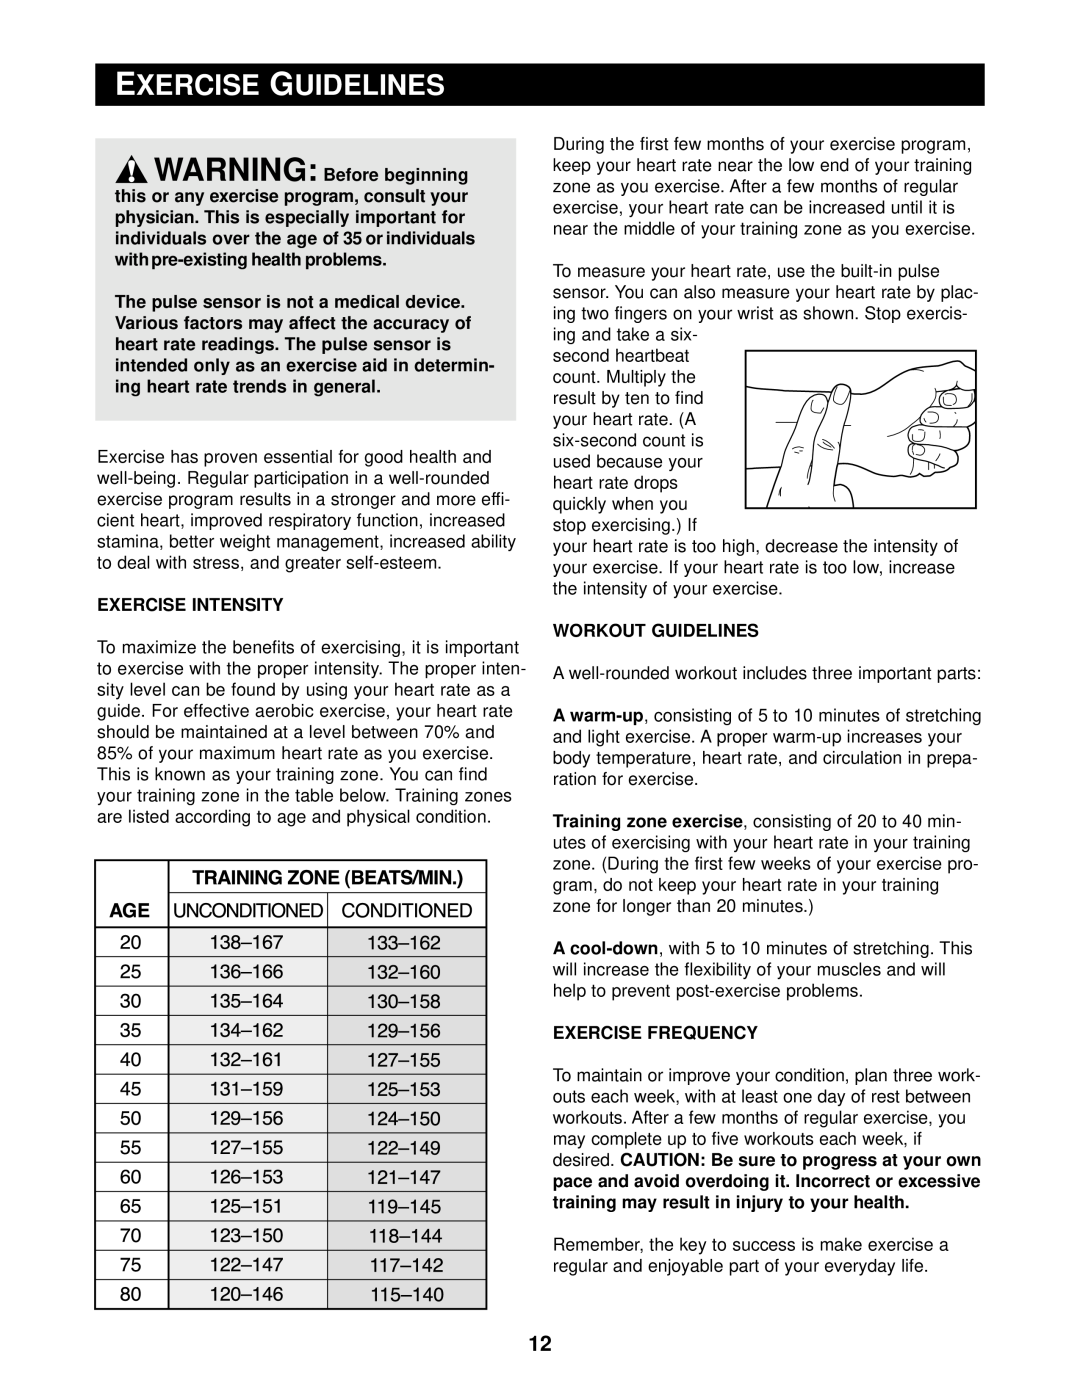 Reebok Fitness RBEX39011 manual E Xercise, physician. This is, Exercise Intensity, Workout Guidelines, Exercise Frequency 